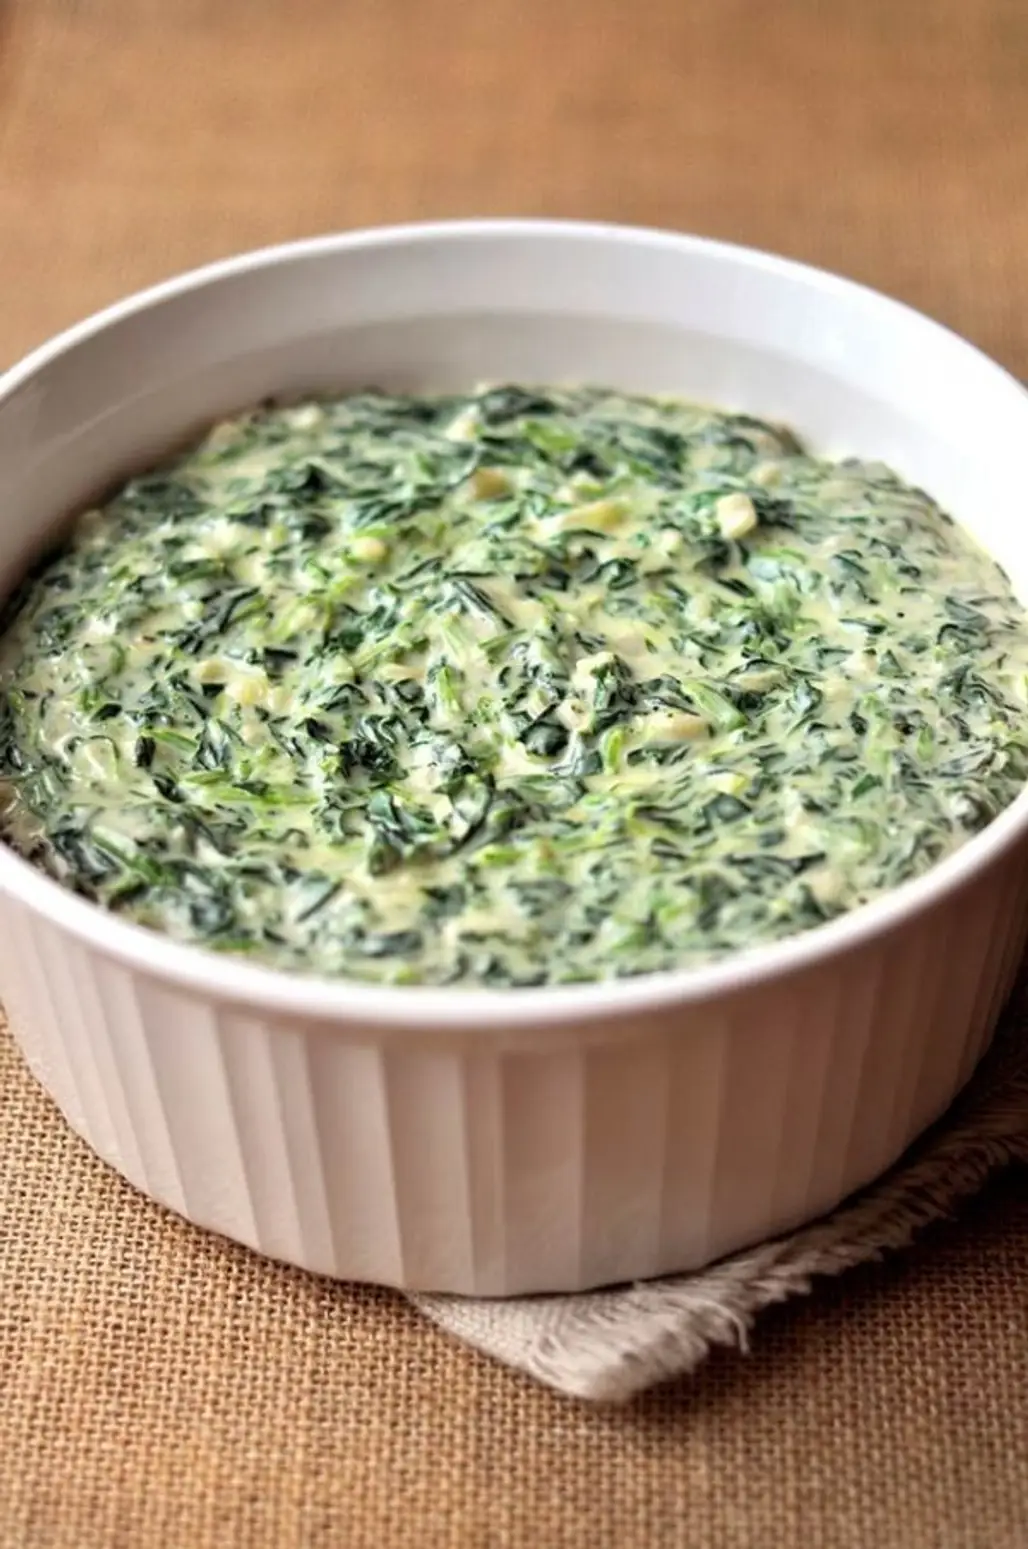 Cuisine, Food, Dish, Ingredient, Creamed spinach,